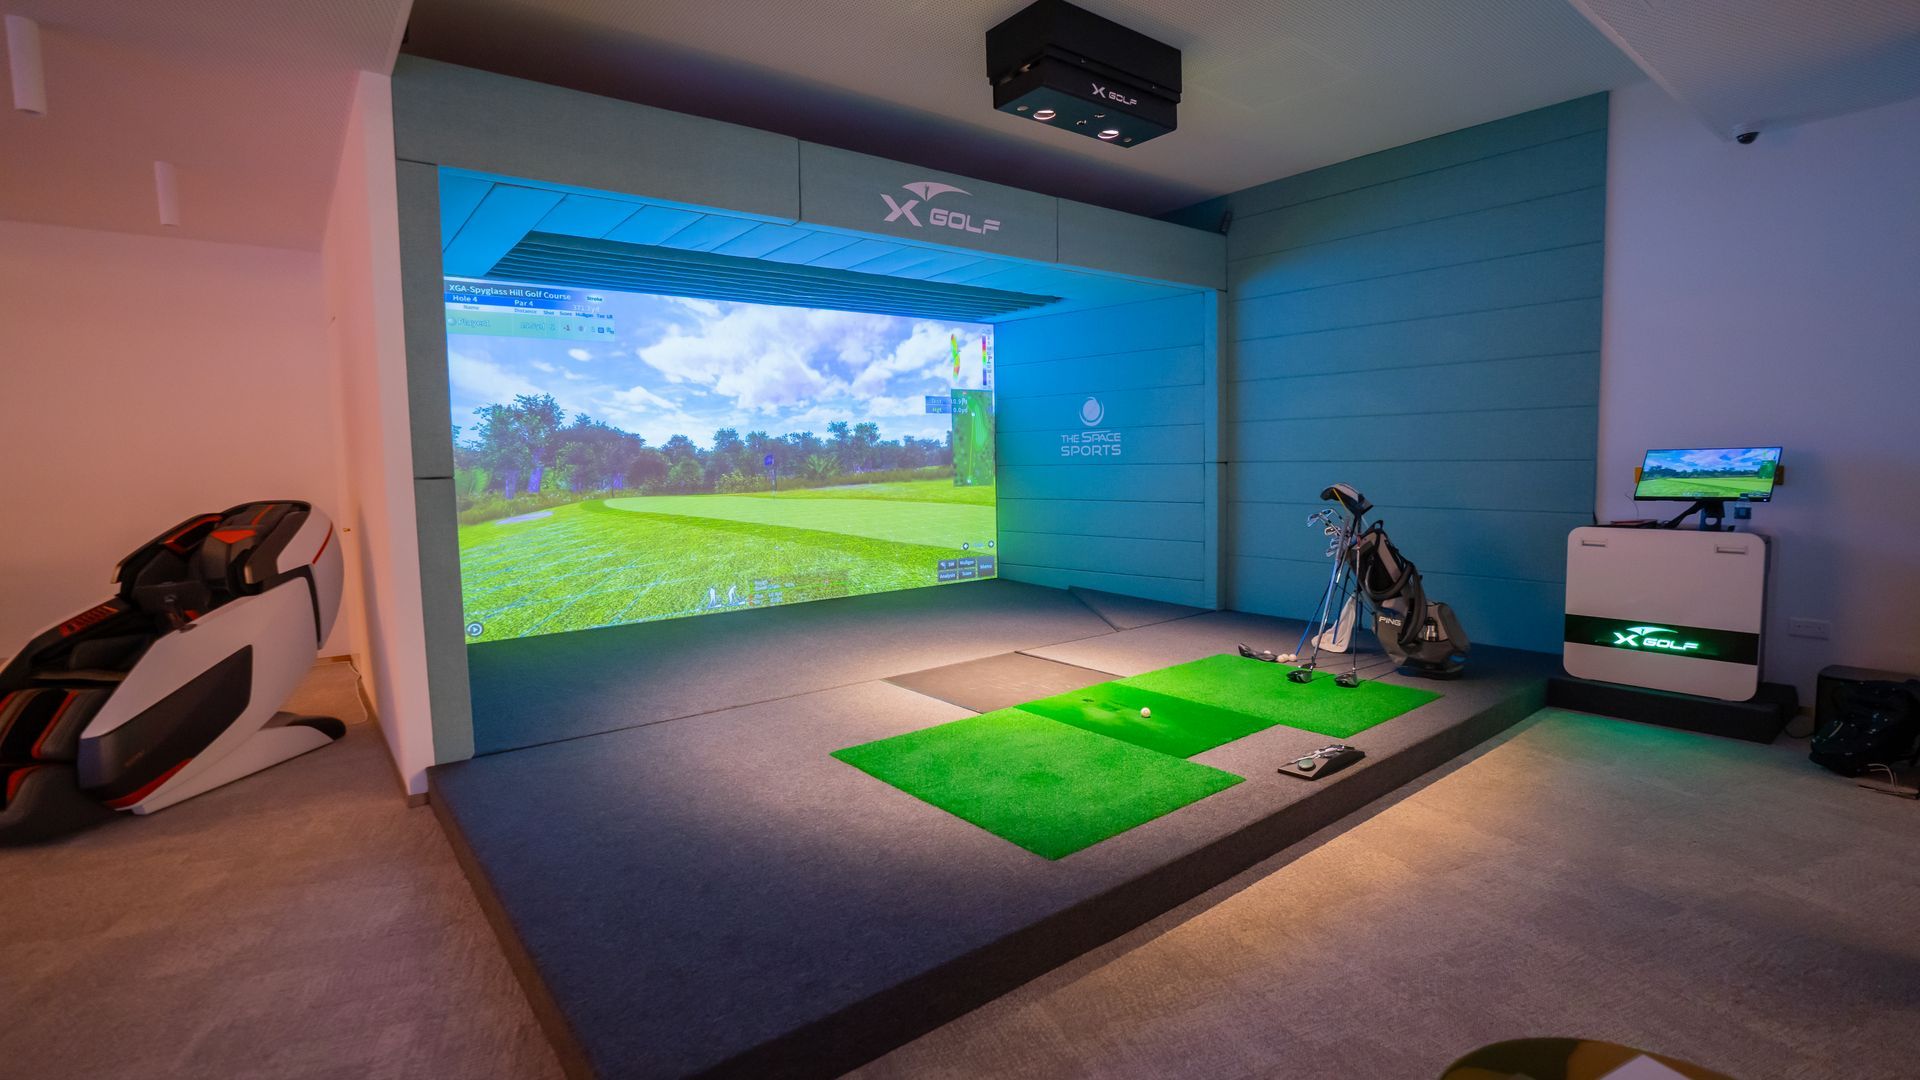 there is a golf simulator in the middle of the room .